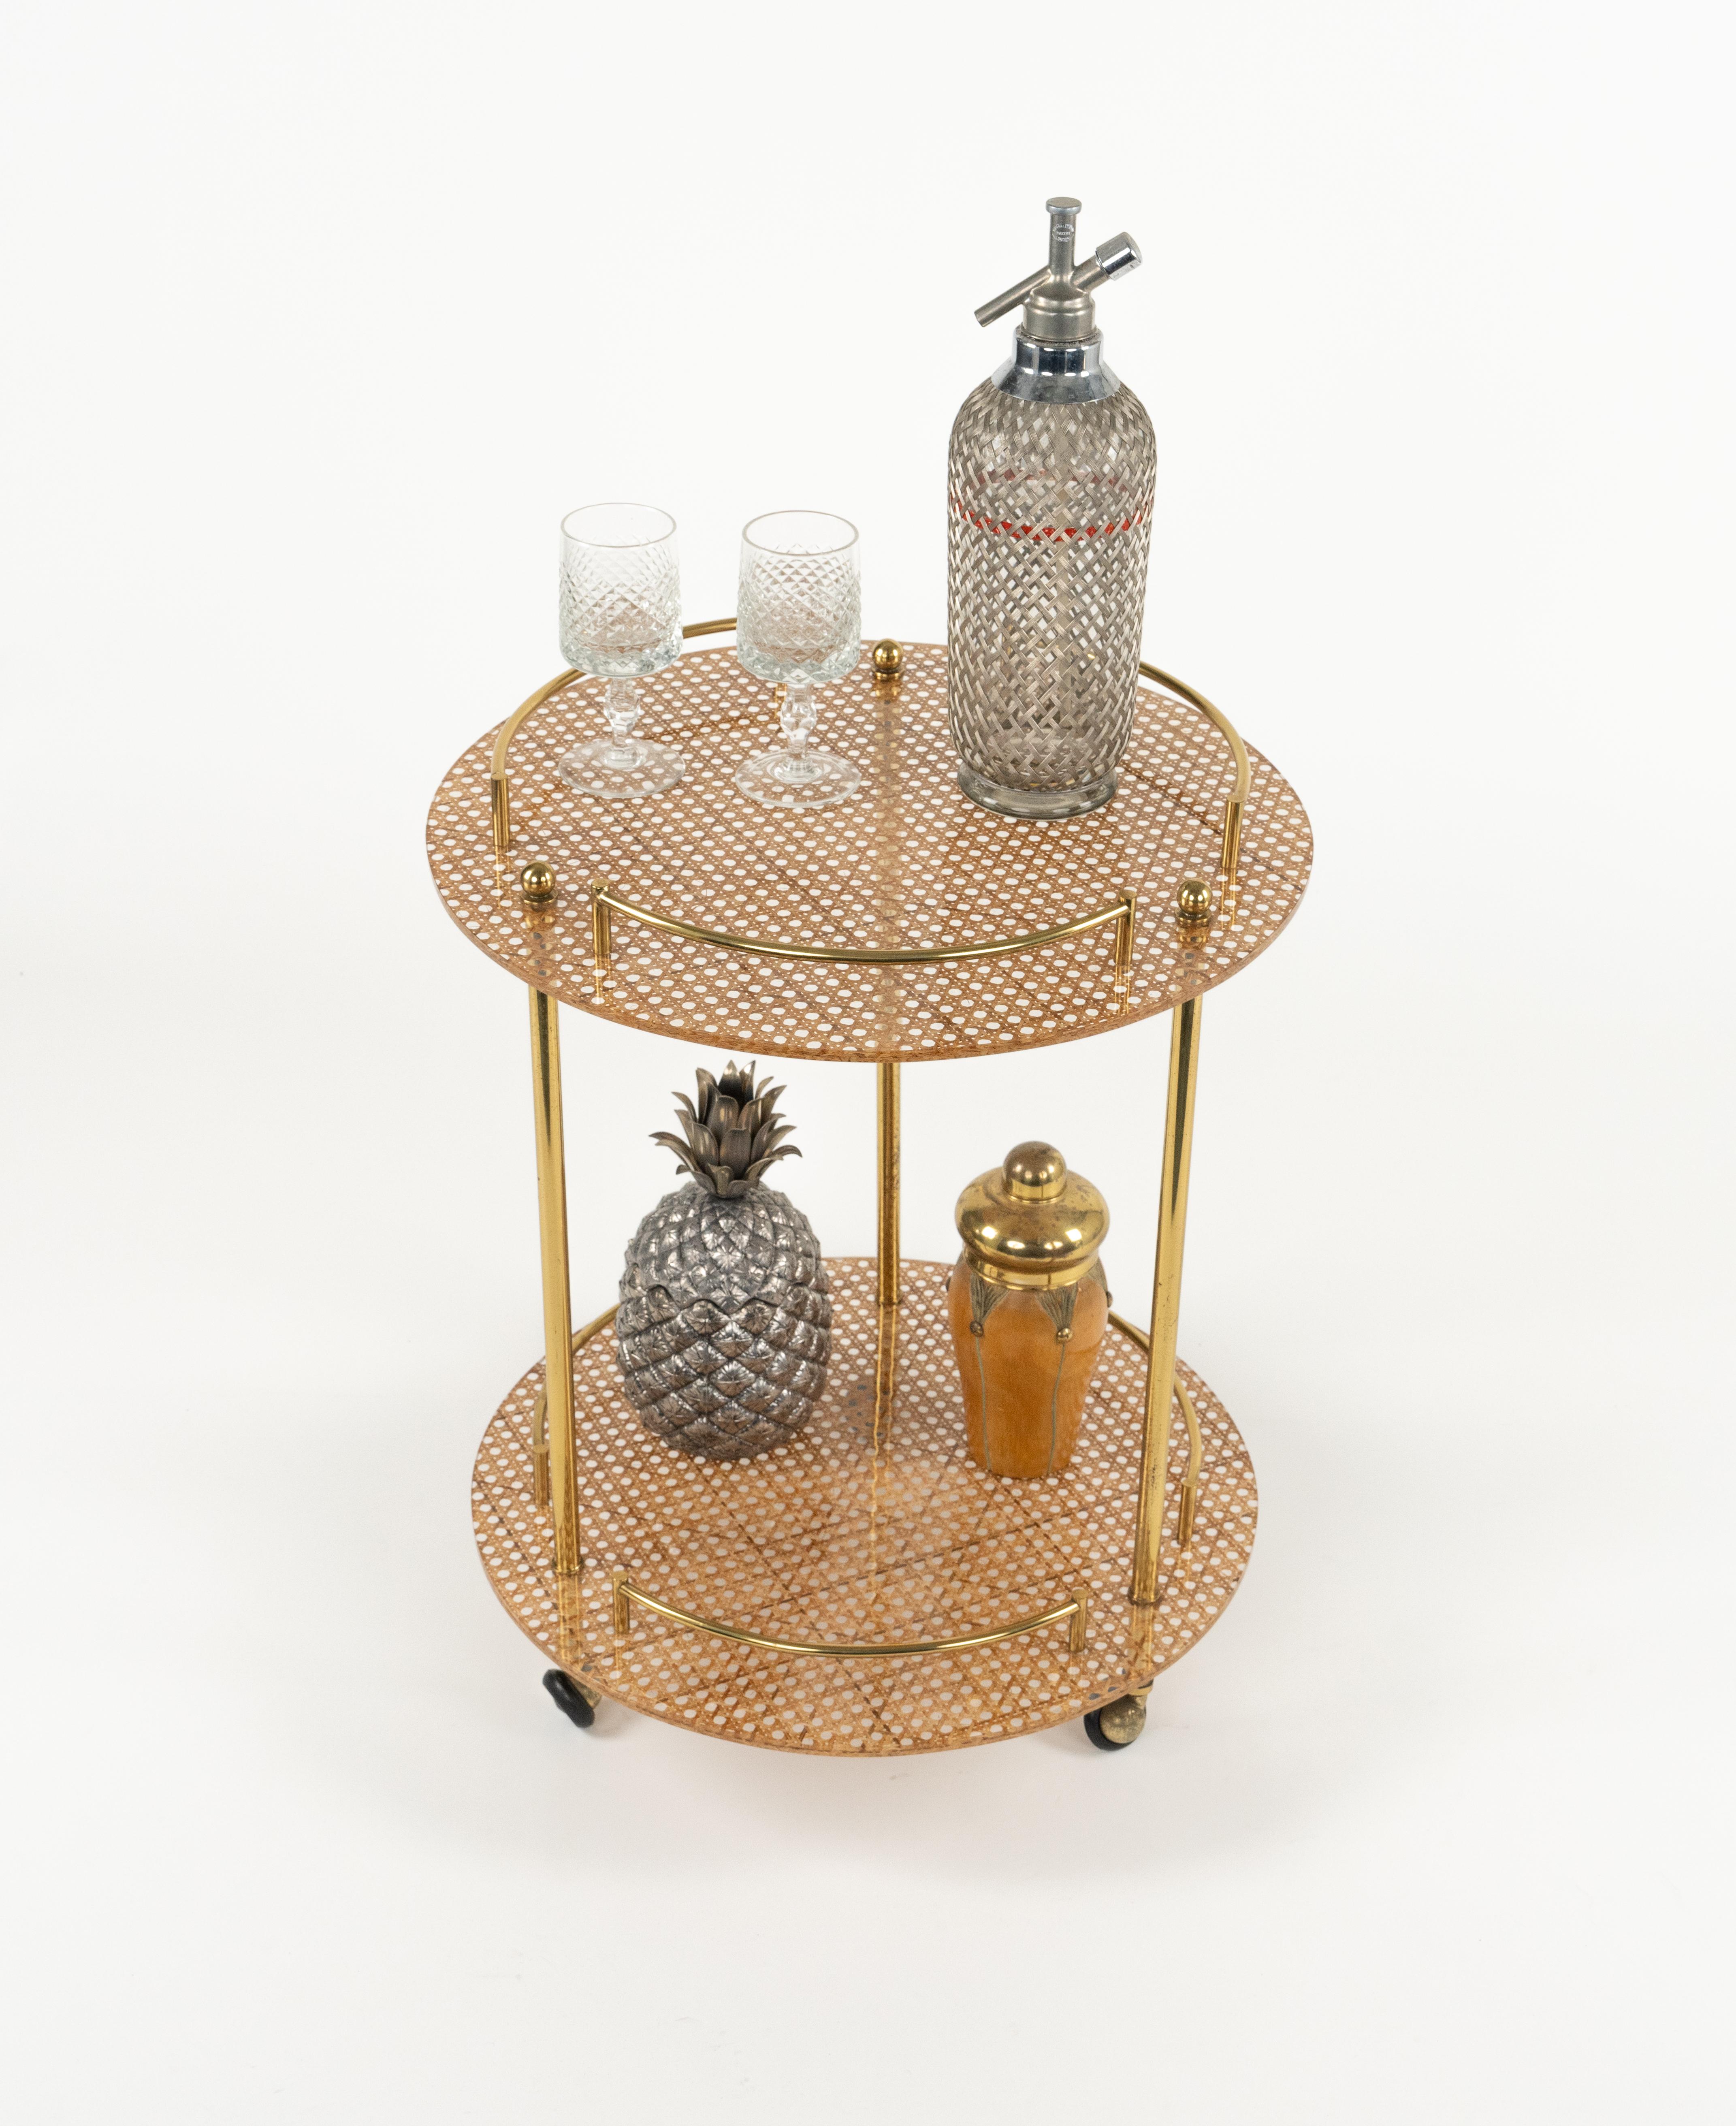 Late 20th Century Serving Bar Cart in Lucite, Brass and Rattan Christian Dior Style, Italy 1970s For Sale